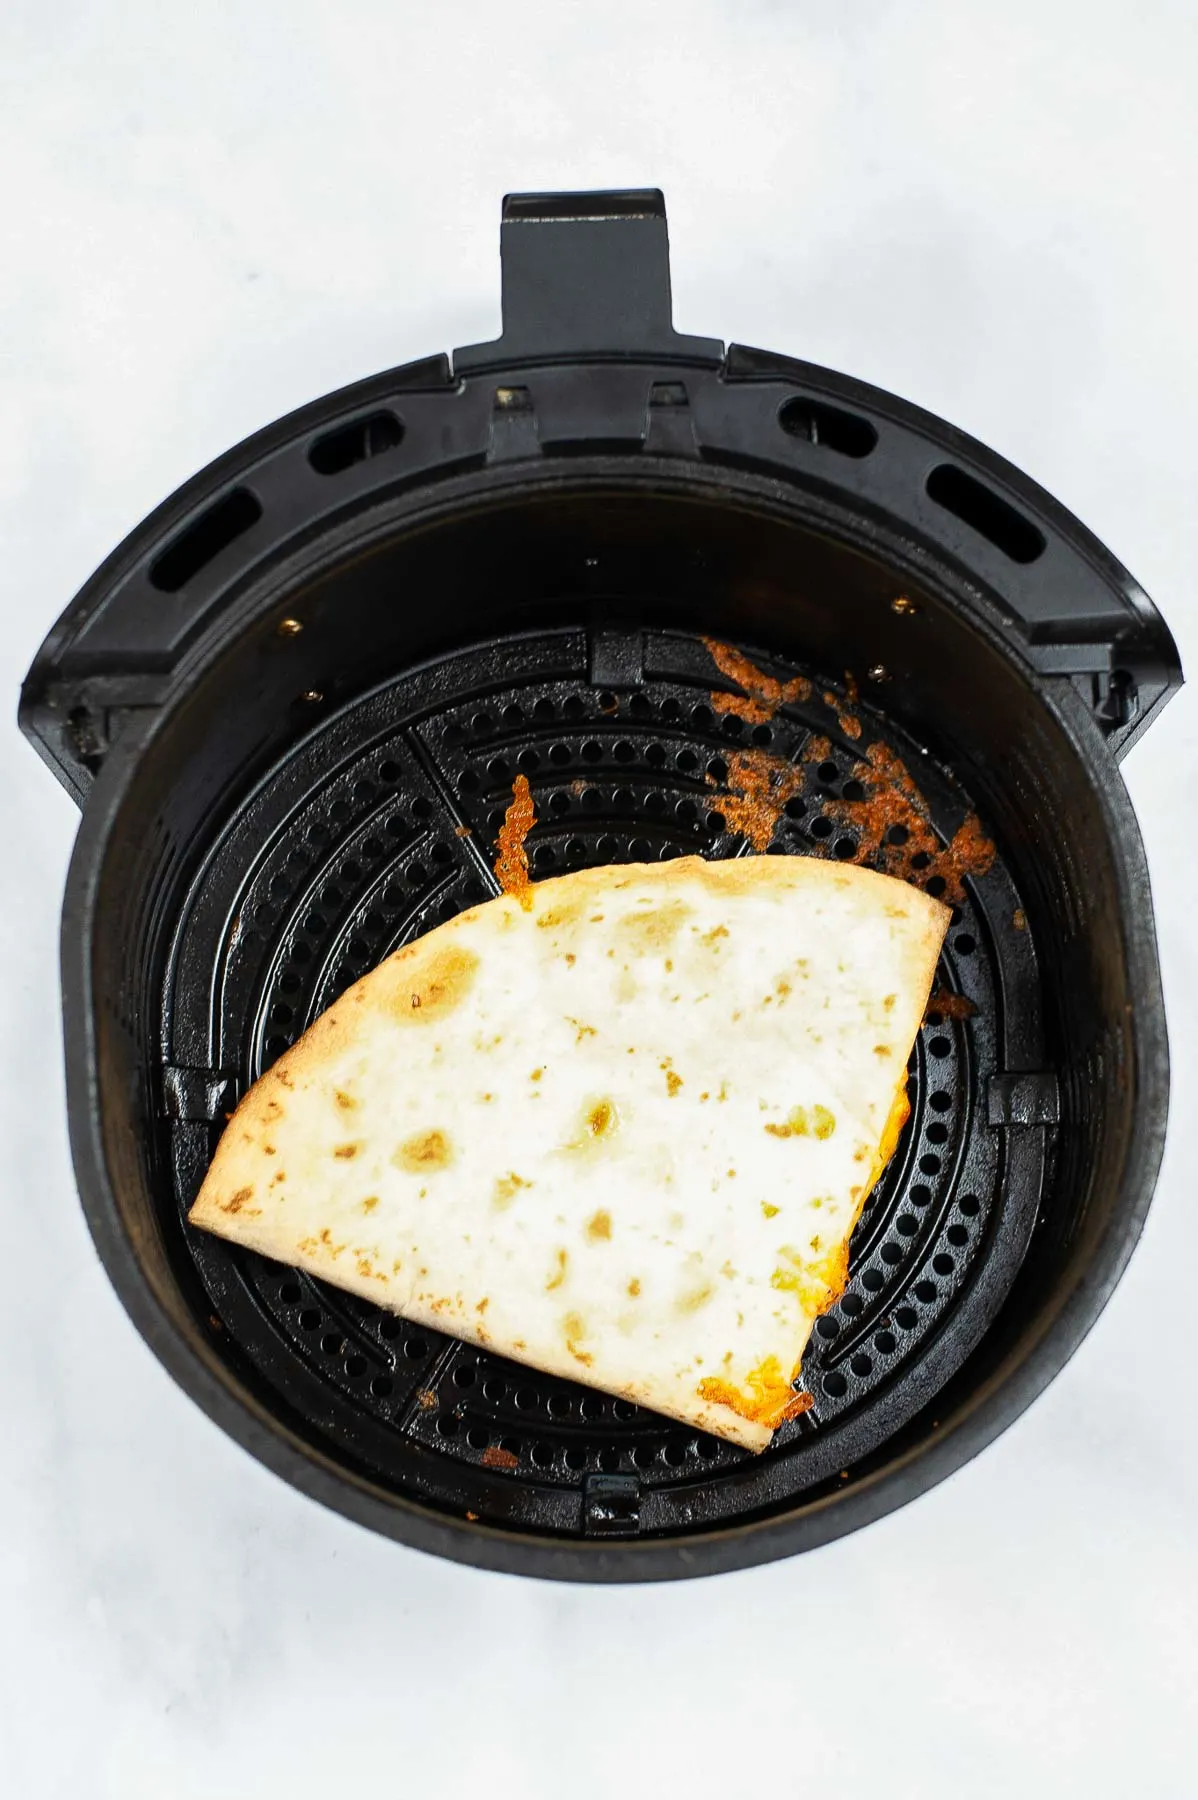 Cooked quesadilla in an air fryer.